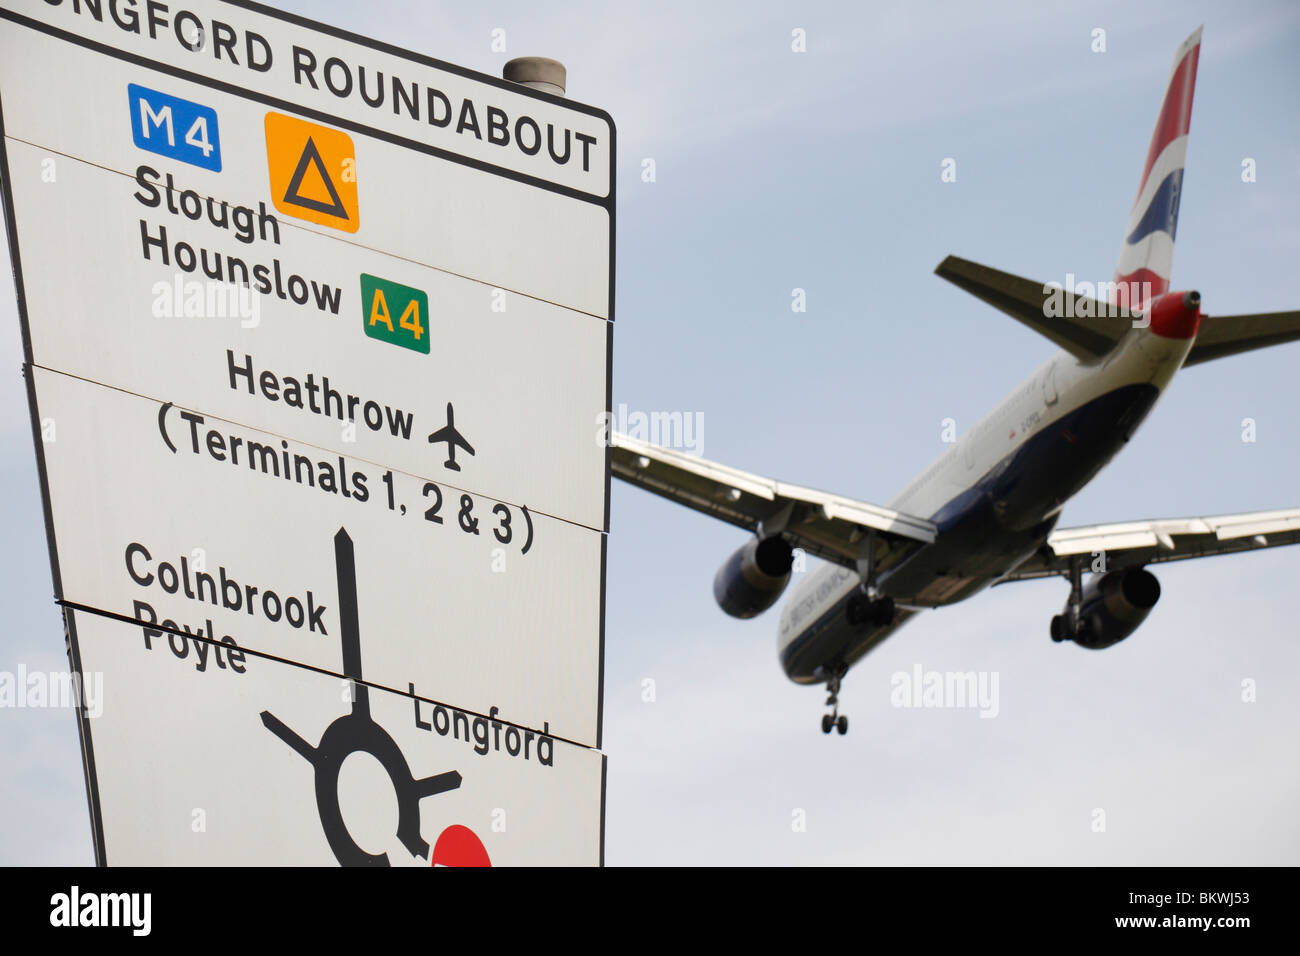 A British Airways plane passing a road sign while landing at Heathrow Airport, London, UK. Stock Photo